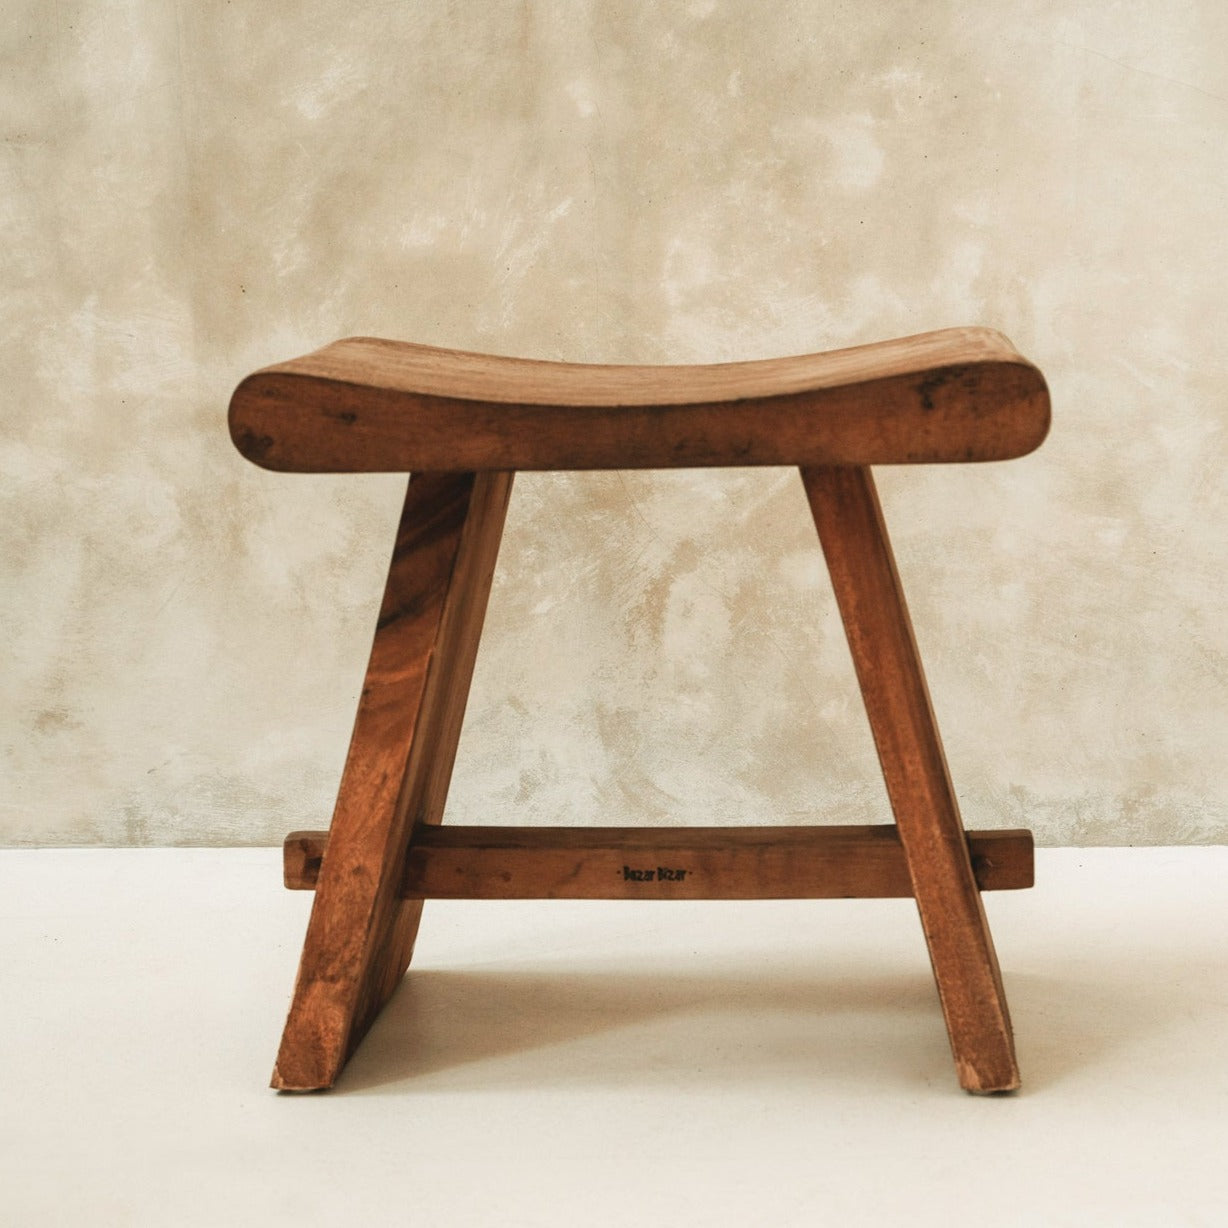 Copy of THE SUAR Stool side view